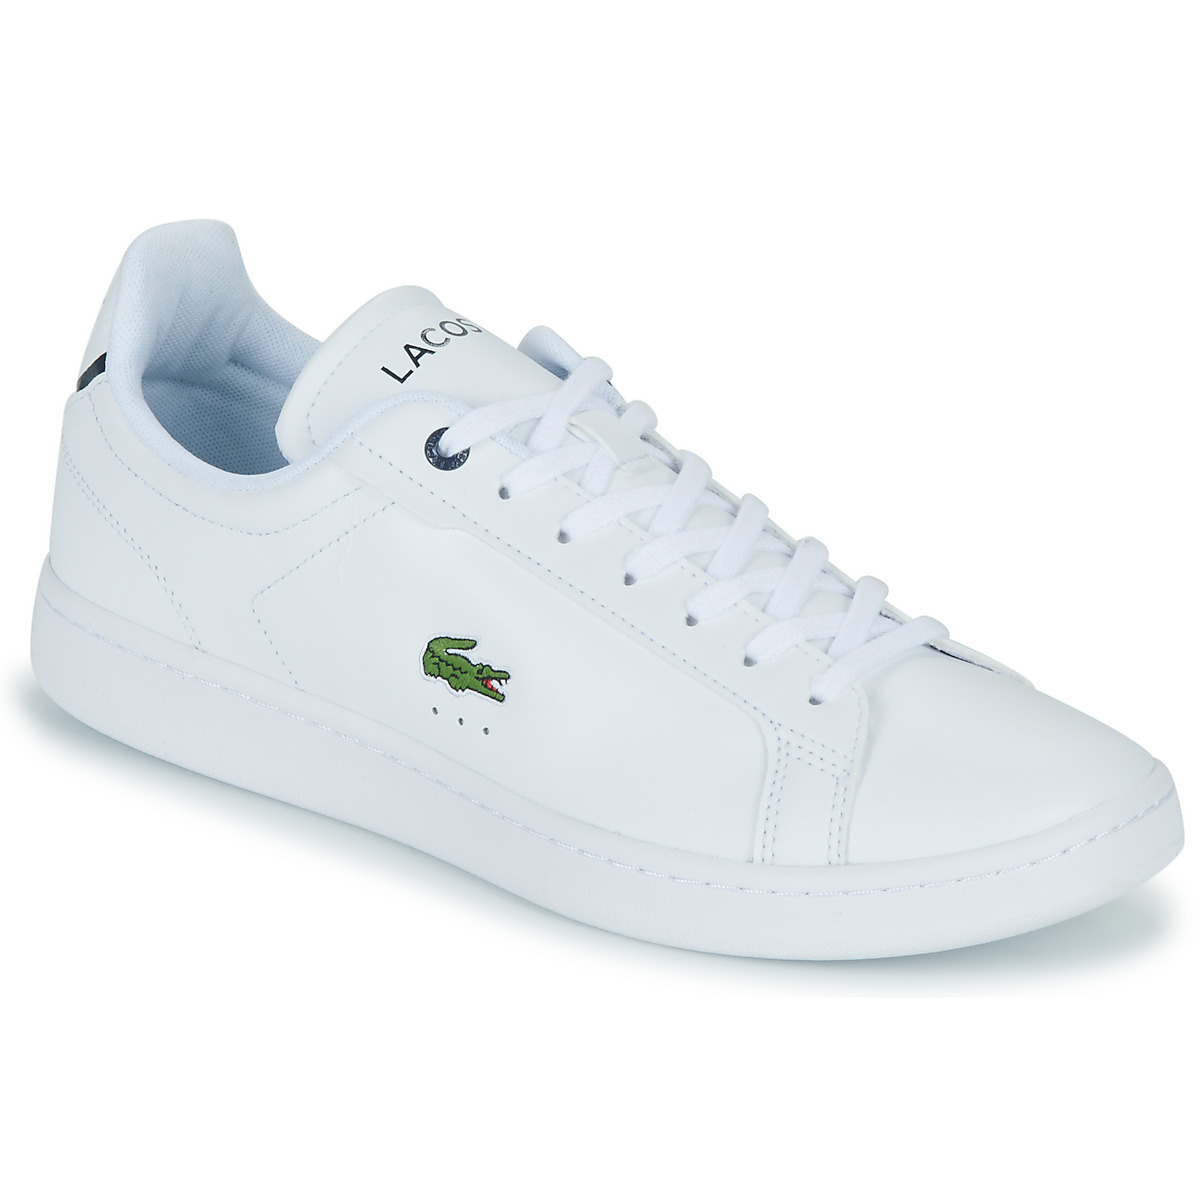 Chaussures Homme Calvin Klein Jeans CARNABY PRO Blanc / Bleu